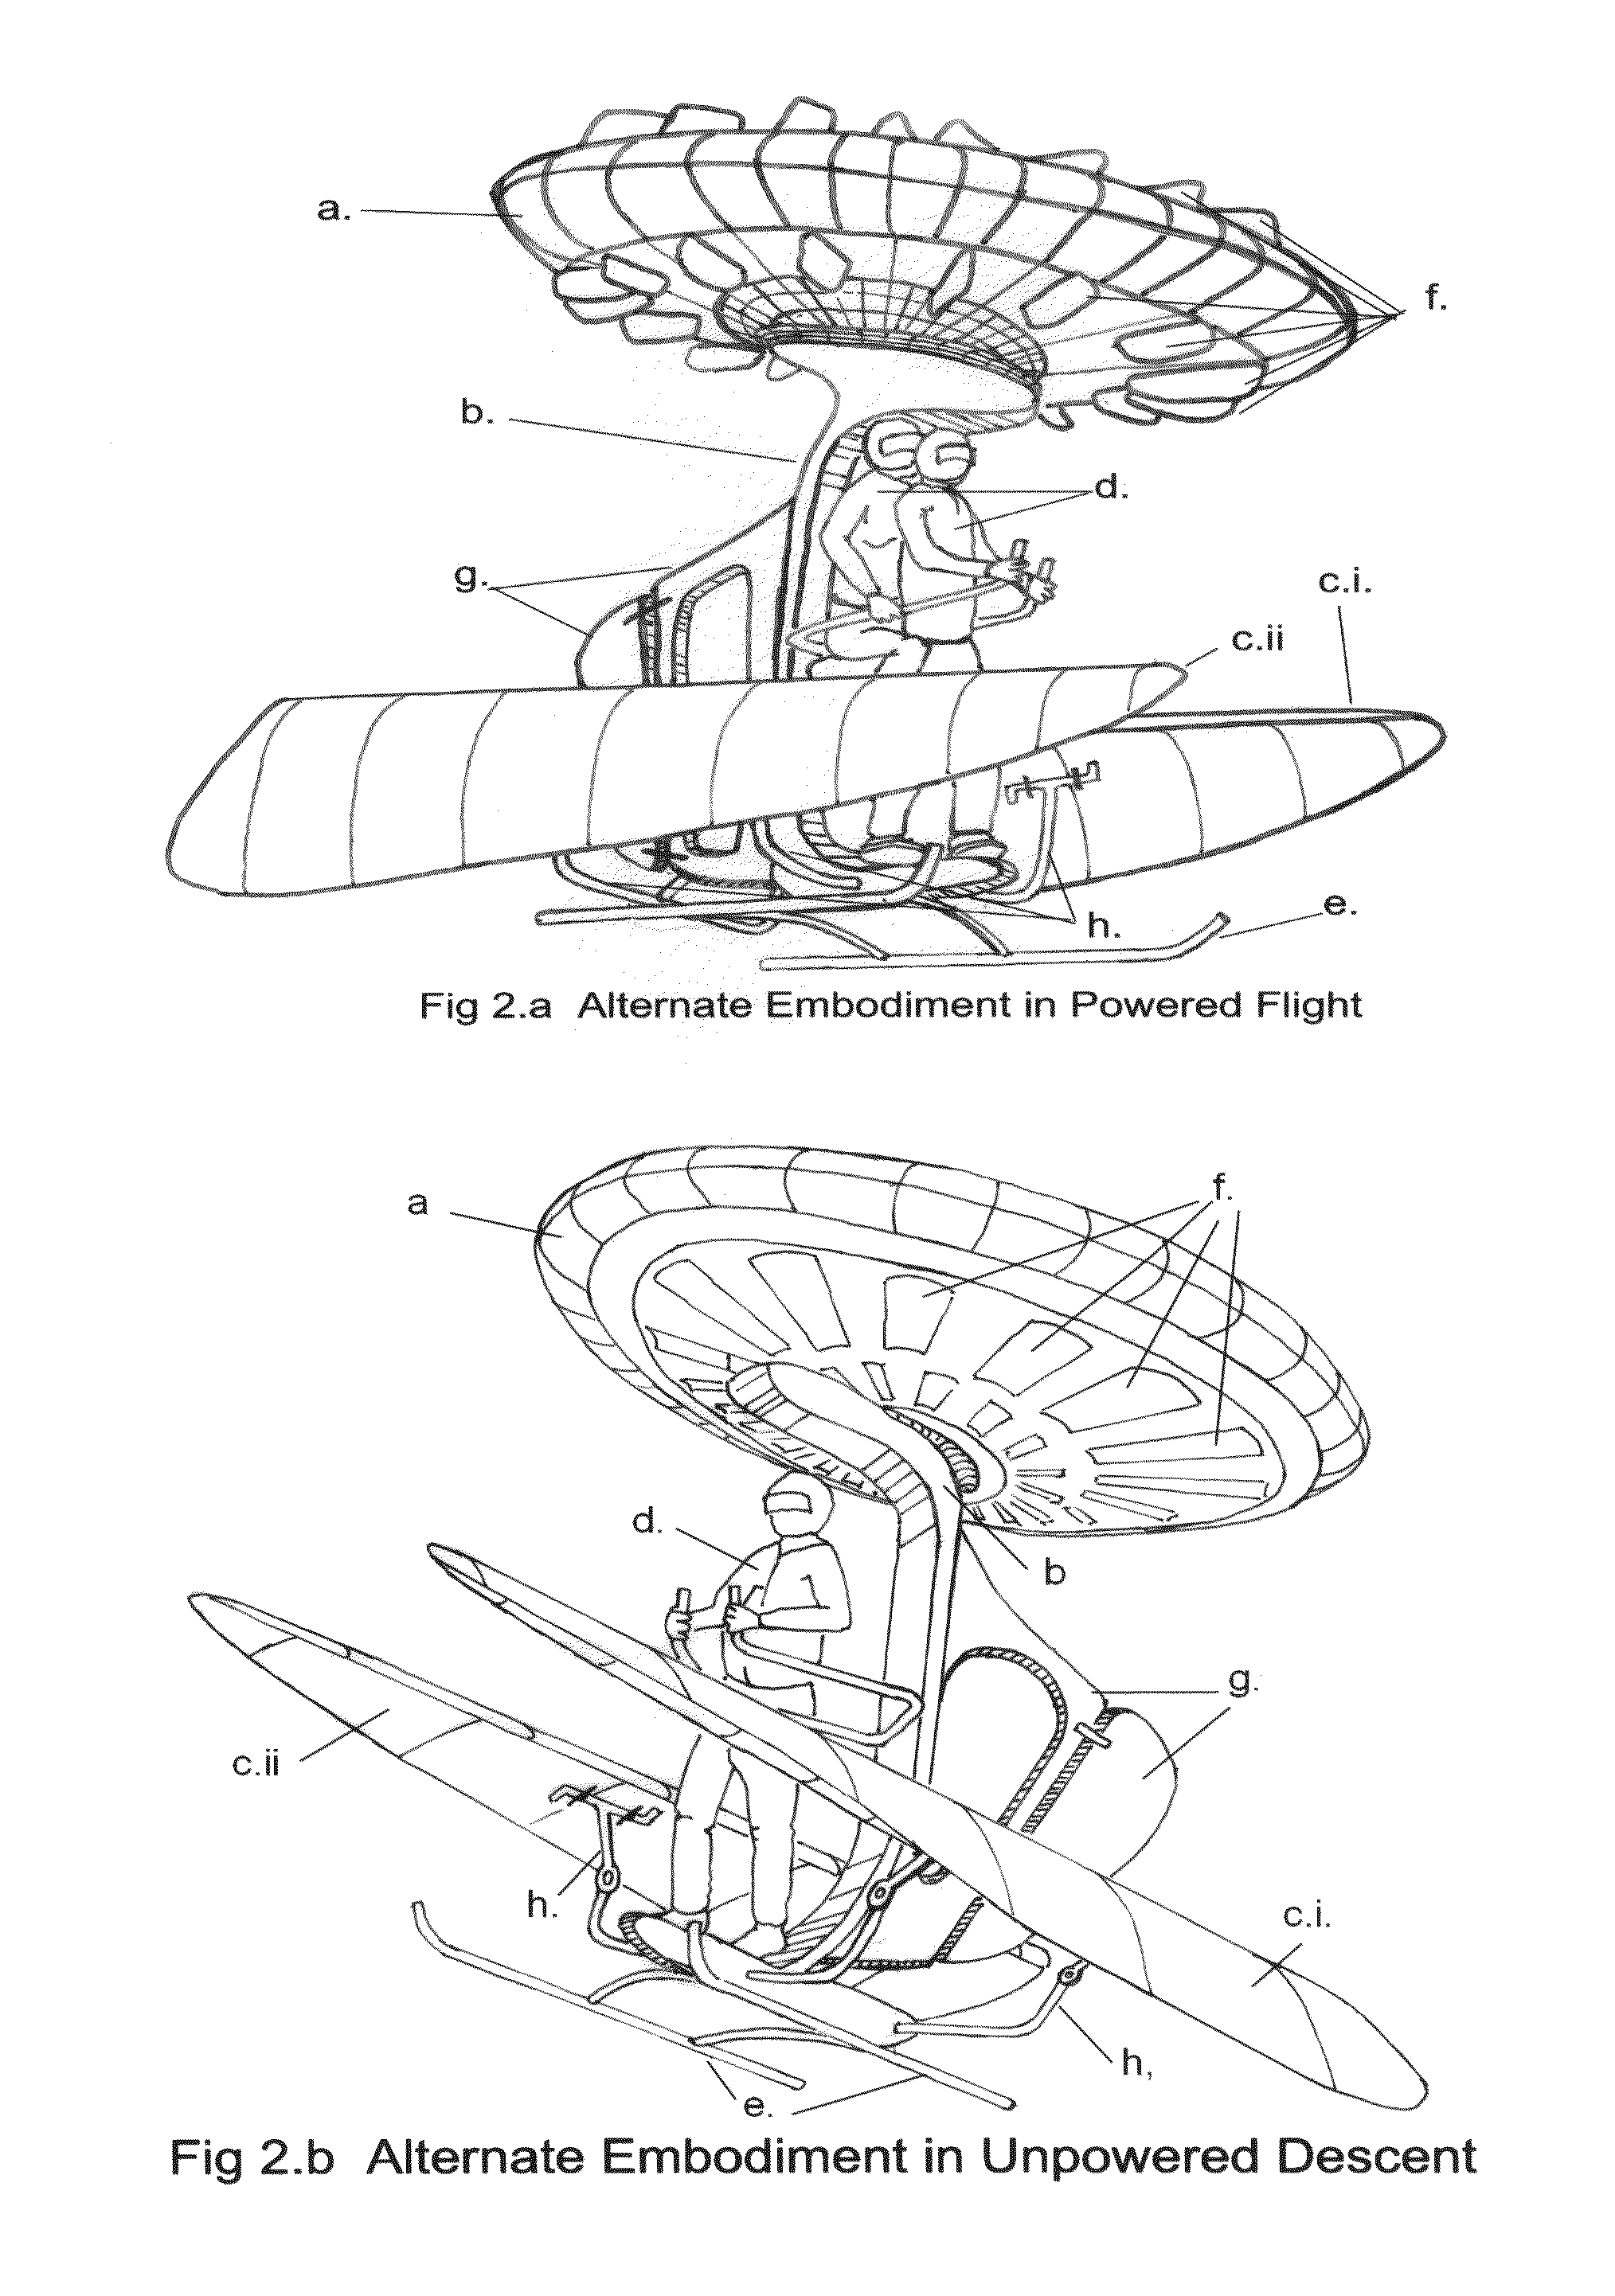 Safety flier—a parachute-glider air-vehicle with vertical take-off and landing capability